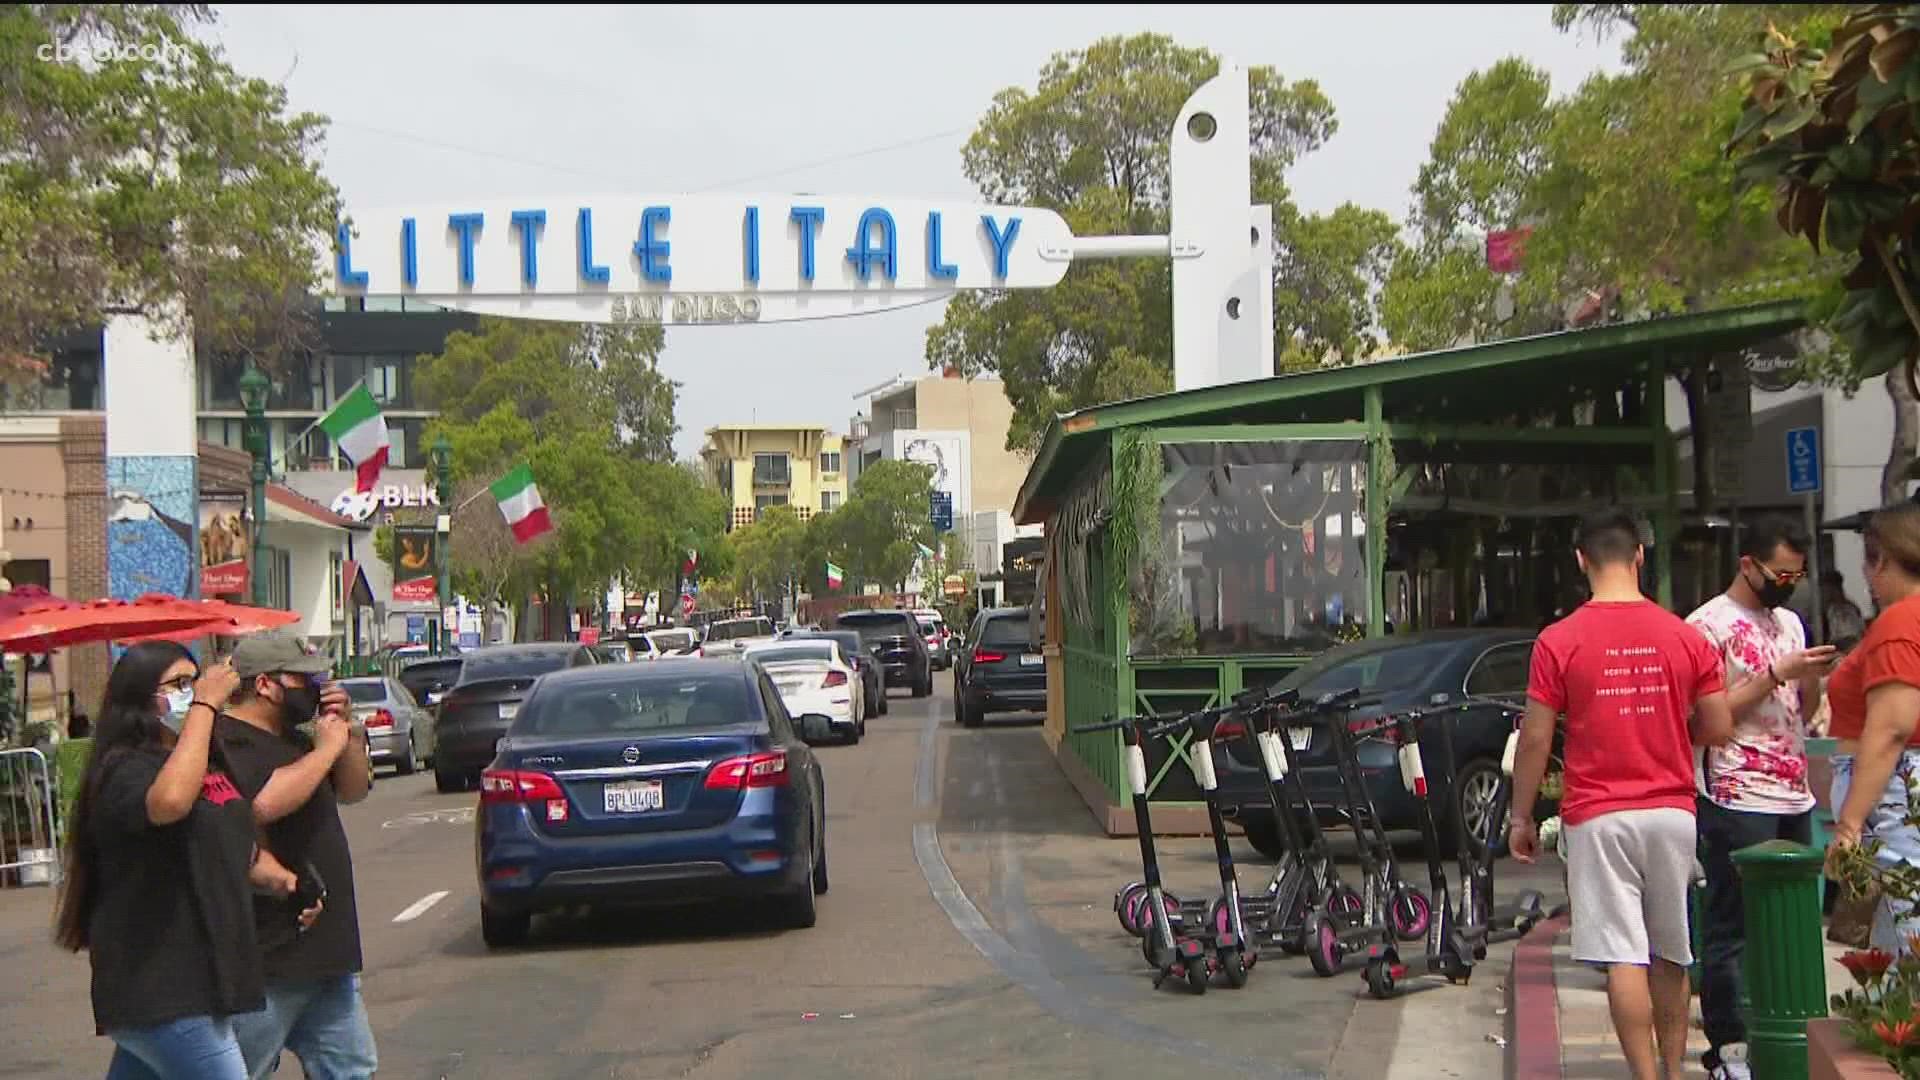 News 8 looks into the history of Little Italy, and what it's like today. We revisit Filippi's Pizza, Our Lady of the Rosary and other landmarks featured in 1986.